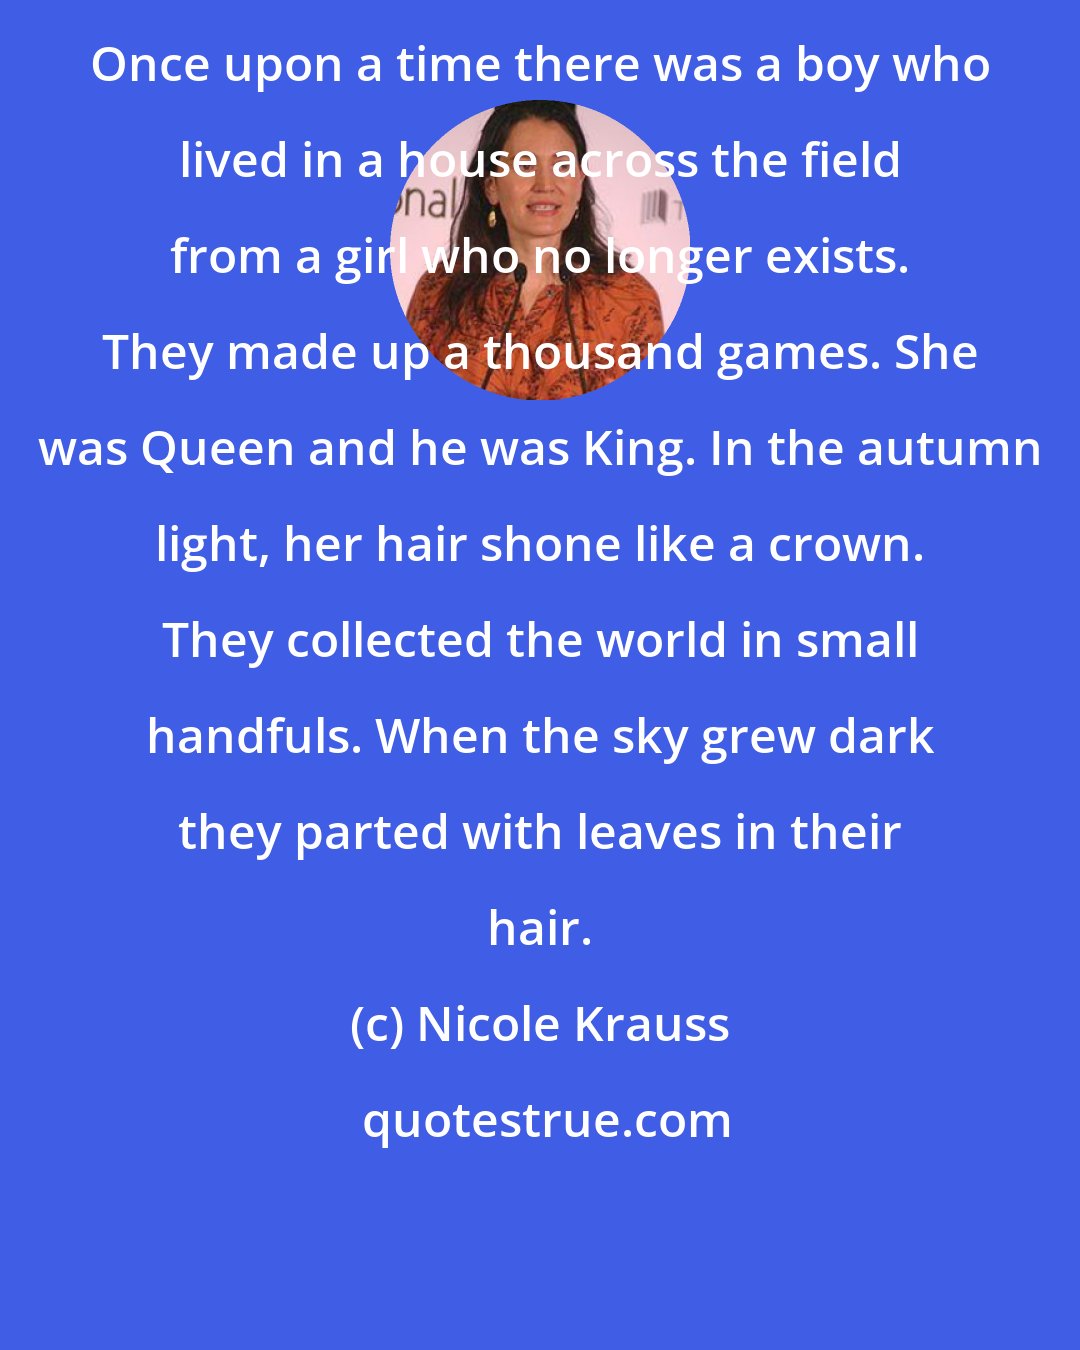 Nicole Krauss: Once upon a time there was a boy who lived in a house across the field from a girl who no longer exists. They made up a thousand games. She was Queen and he was King. In the autumn light, her hair shone like a crown. They collected the world in small handfuls. When the sky grew dark they parted with leaves in their hair.